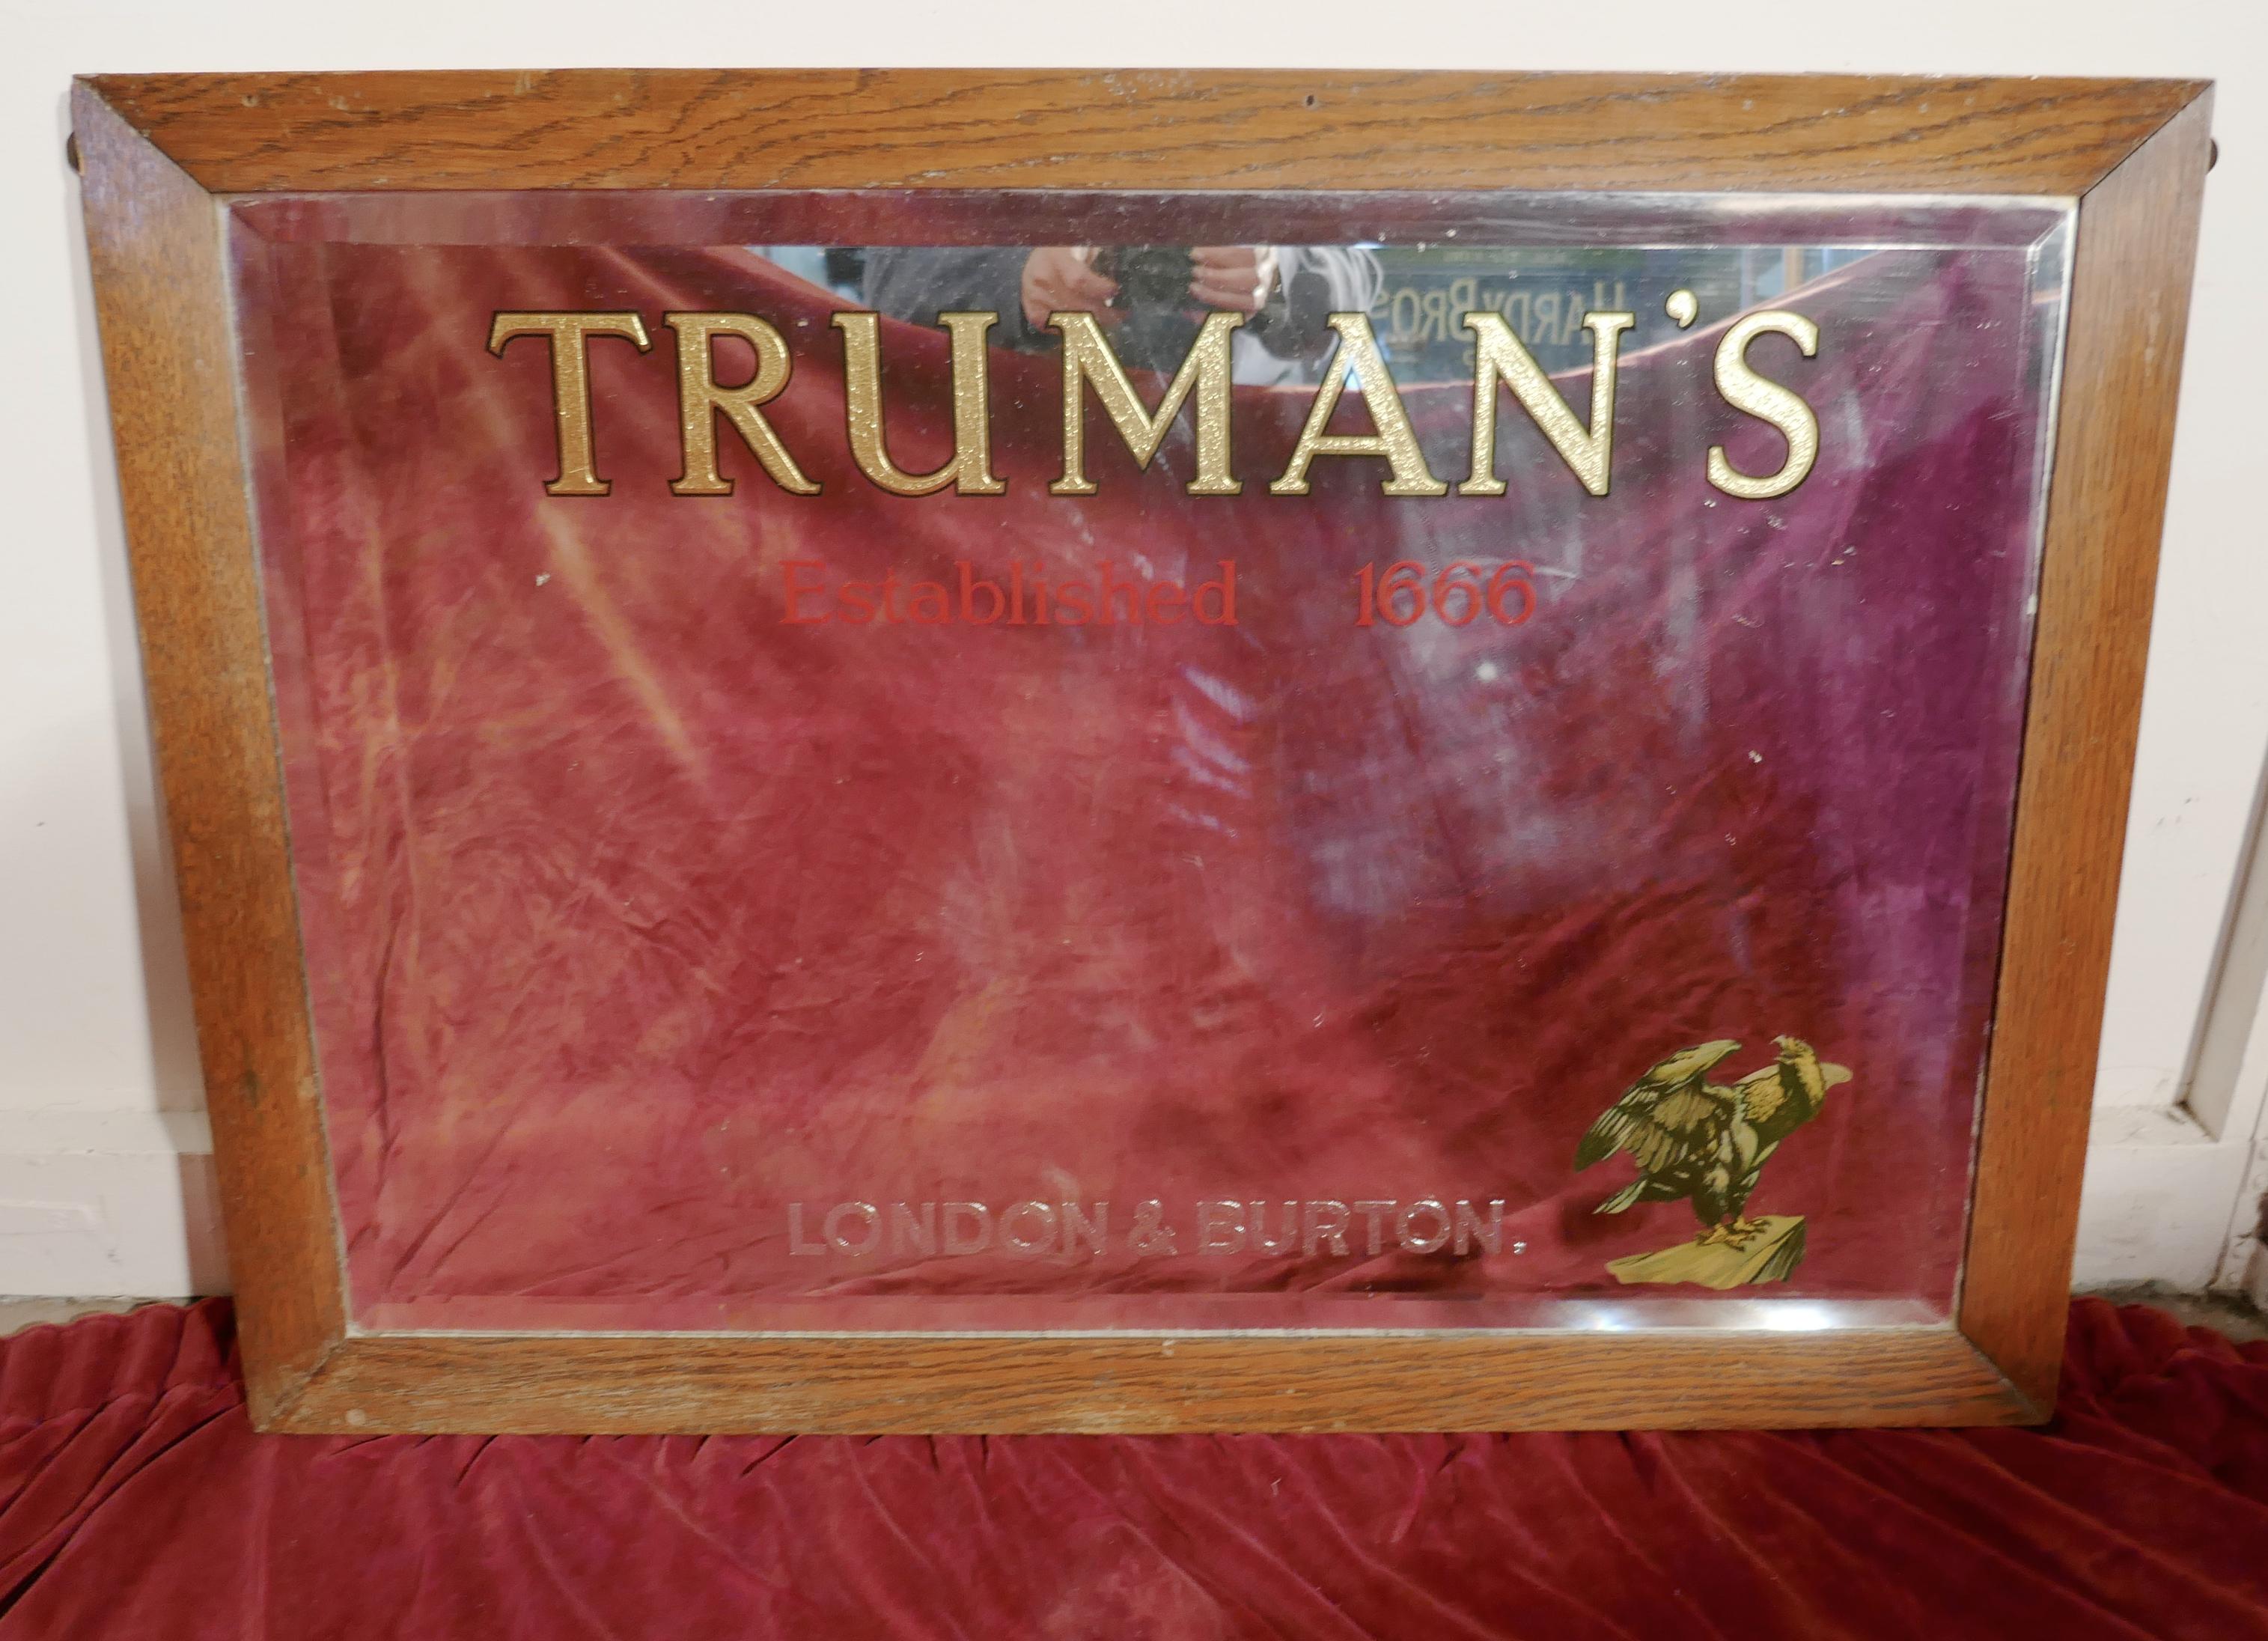 A TRUMAN’S beer advertising mirror, pub mirror for Truman’s.

This is good pictorial advertising mirror, advertising Truman's, established 1666, this is engraved and painted on the reverse of the glass

The mirror has the Eagle logo in the